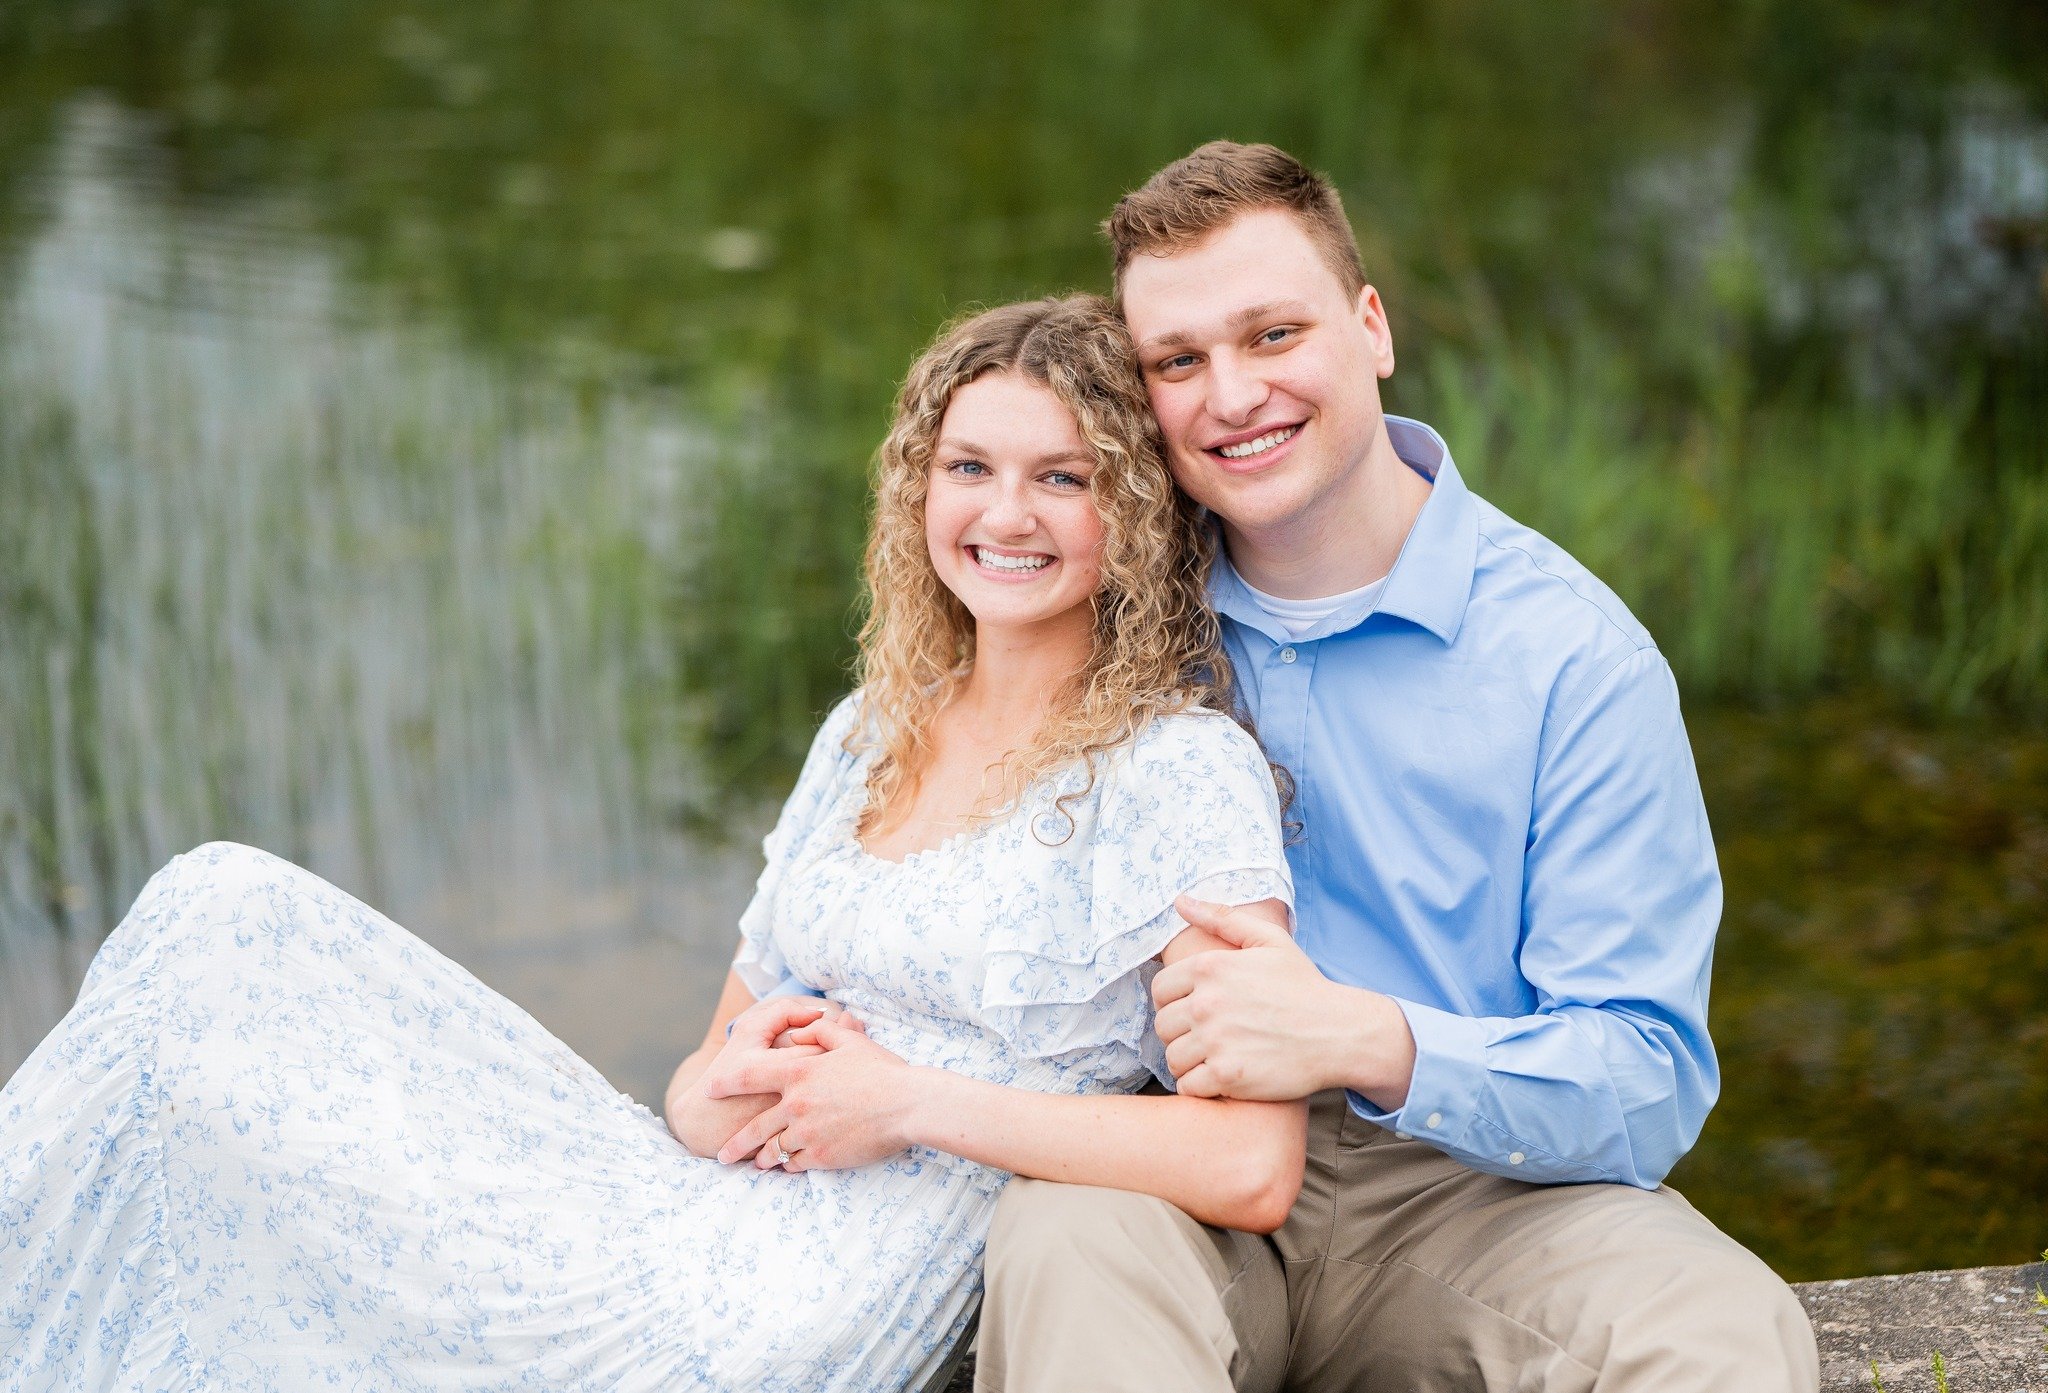 Jaela + Ryan's engagement session was magical!